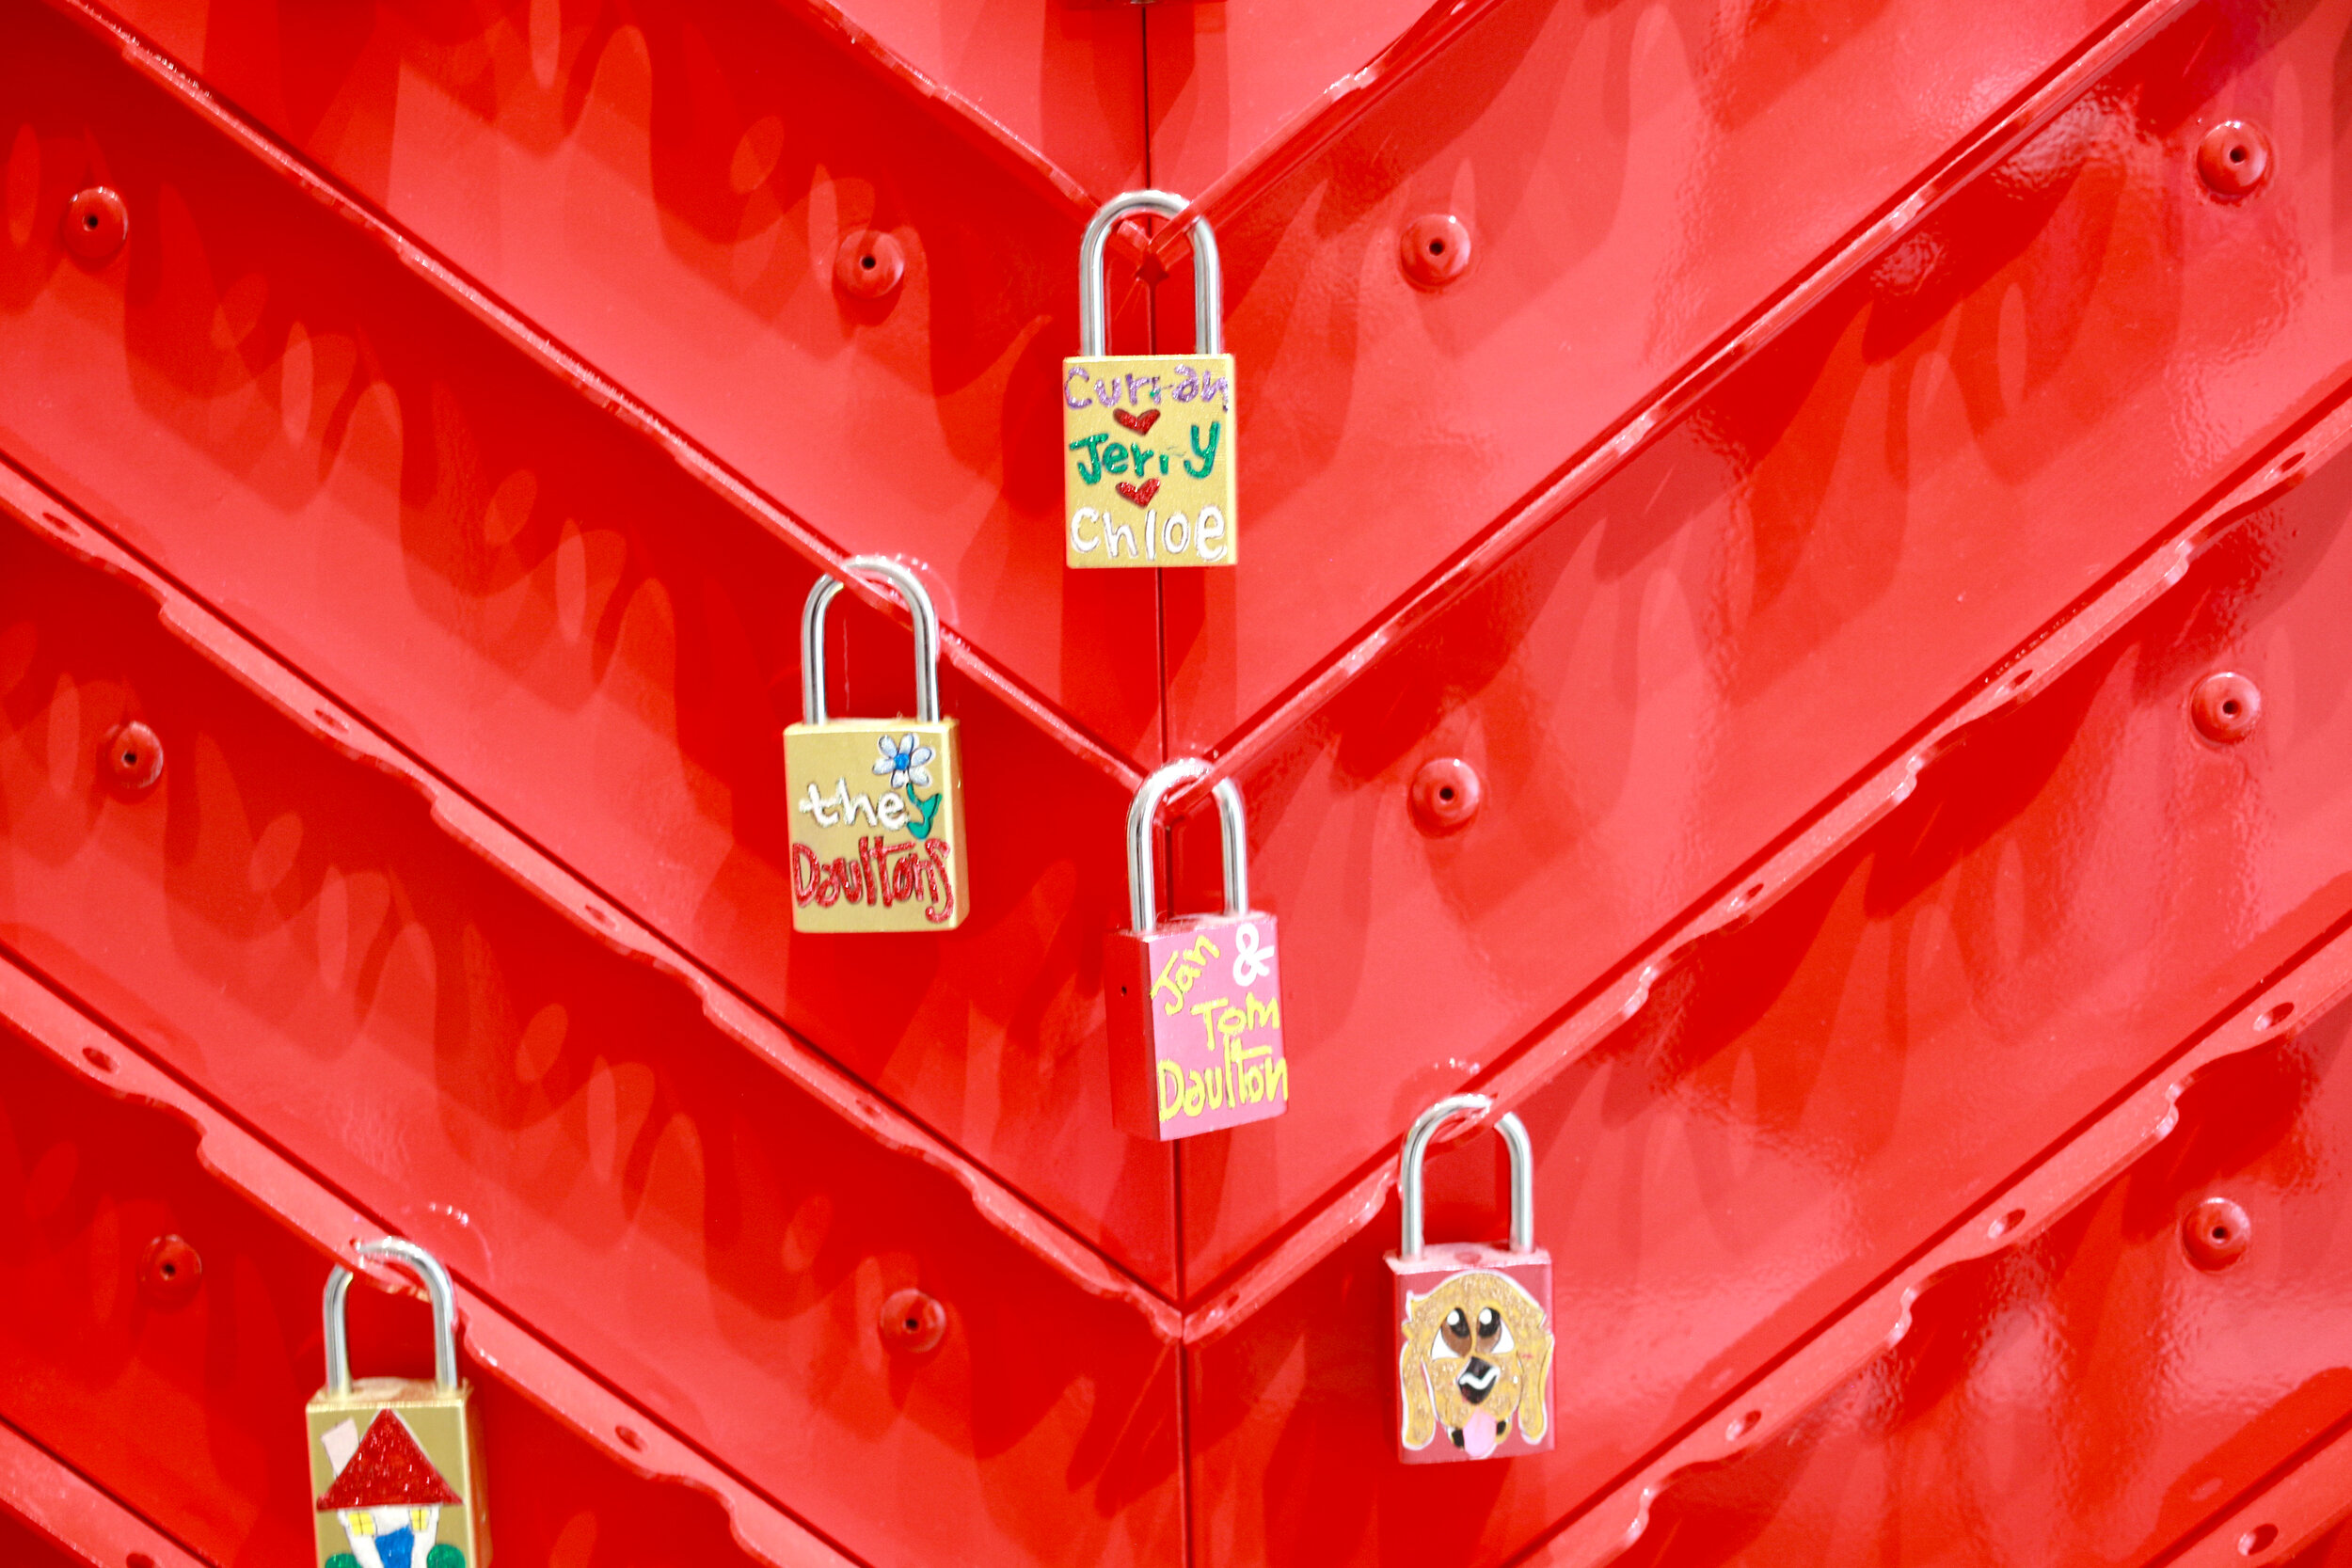 RMHD supporters display their names and artwork on a heart-shaped wall of locks.